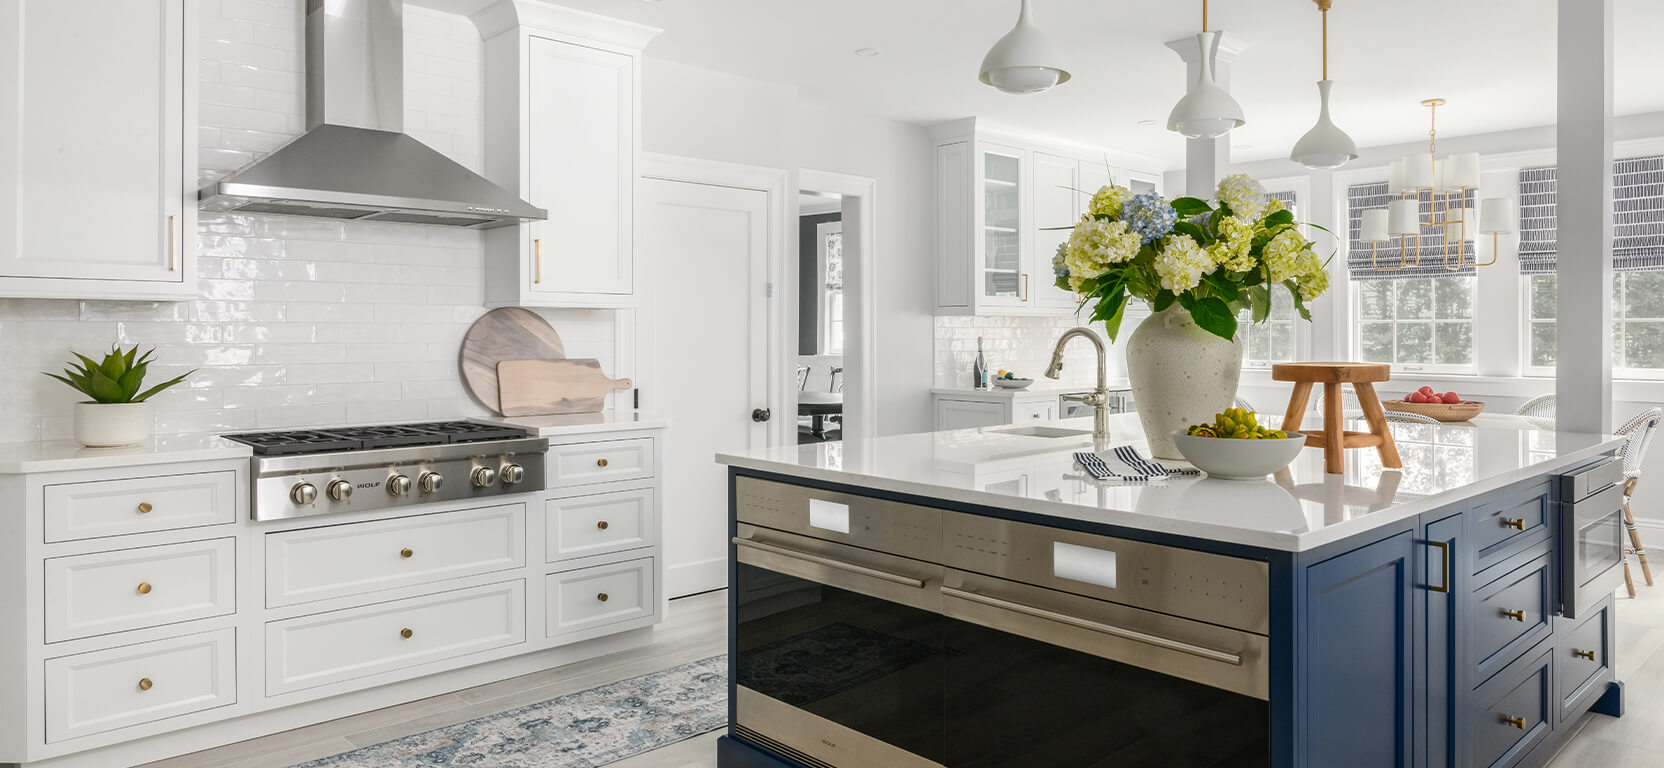 Sunlit white kitchen with double ovens in the center kitchen island, which is painted a deep contrasting shade of navy blue.